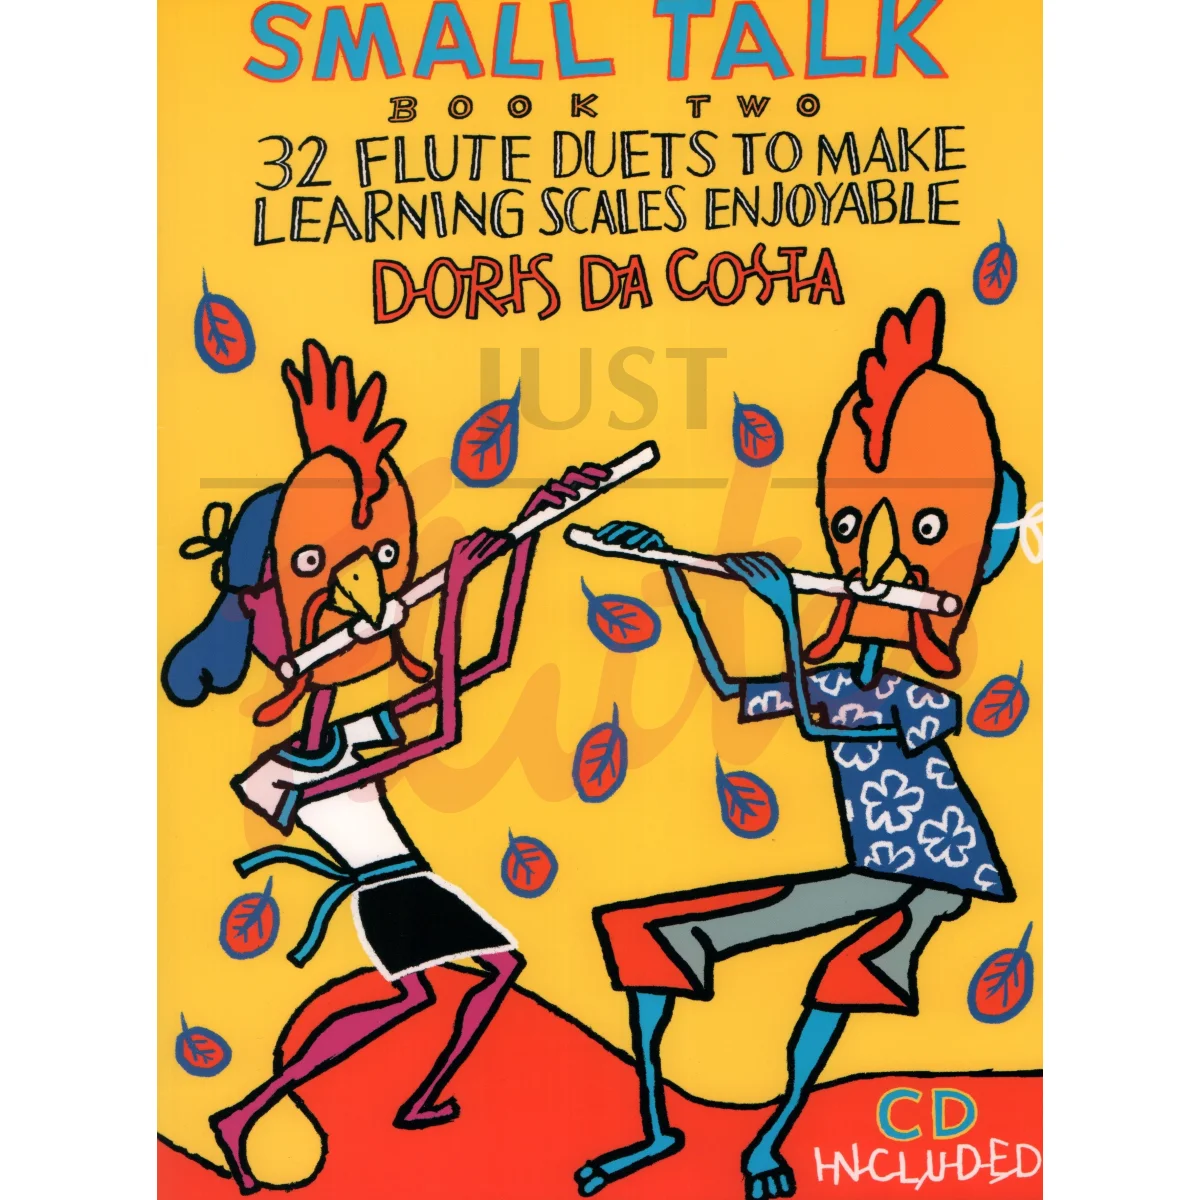 Small Talk for Two Flutes, Book 2